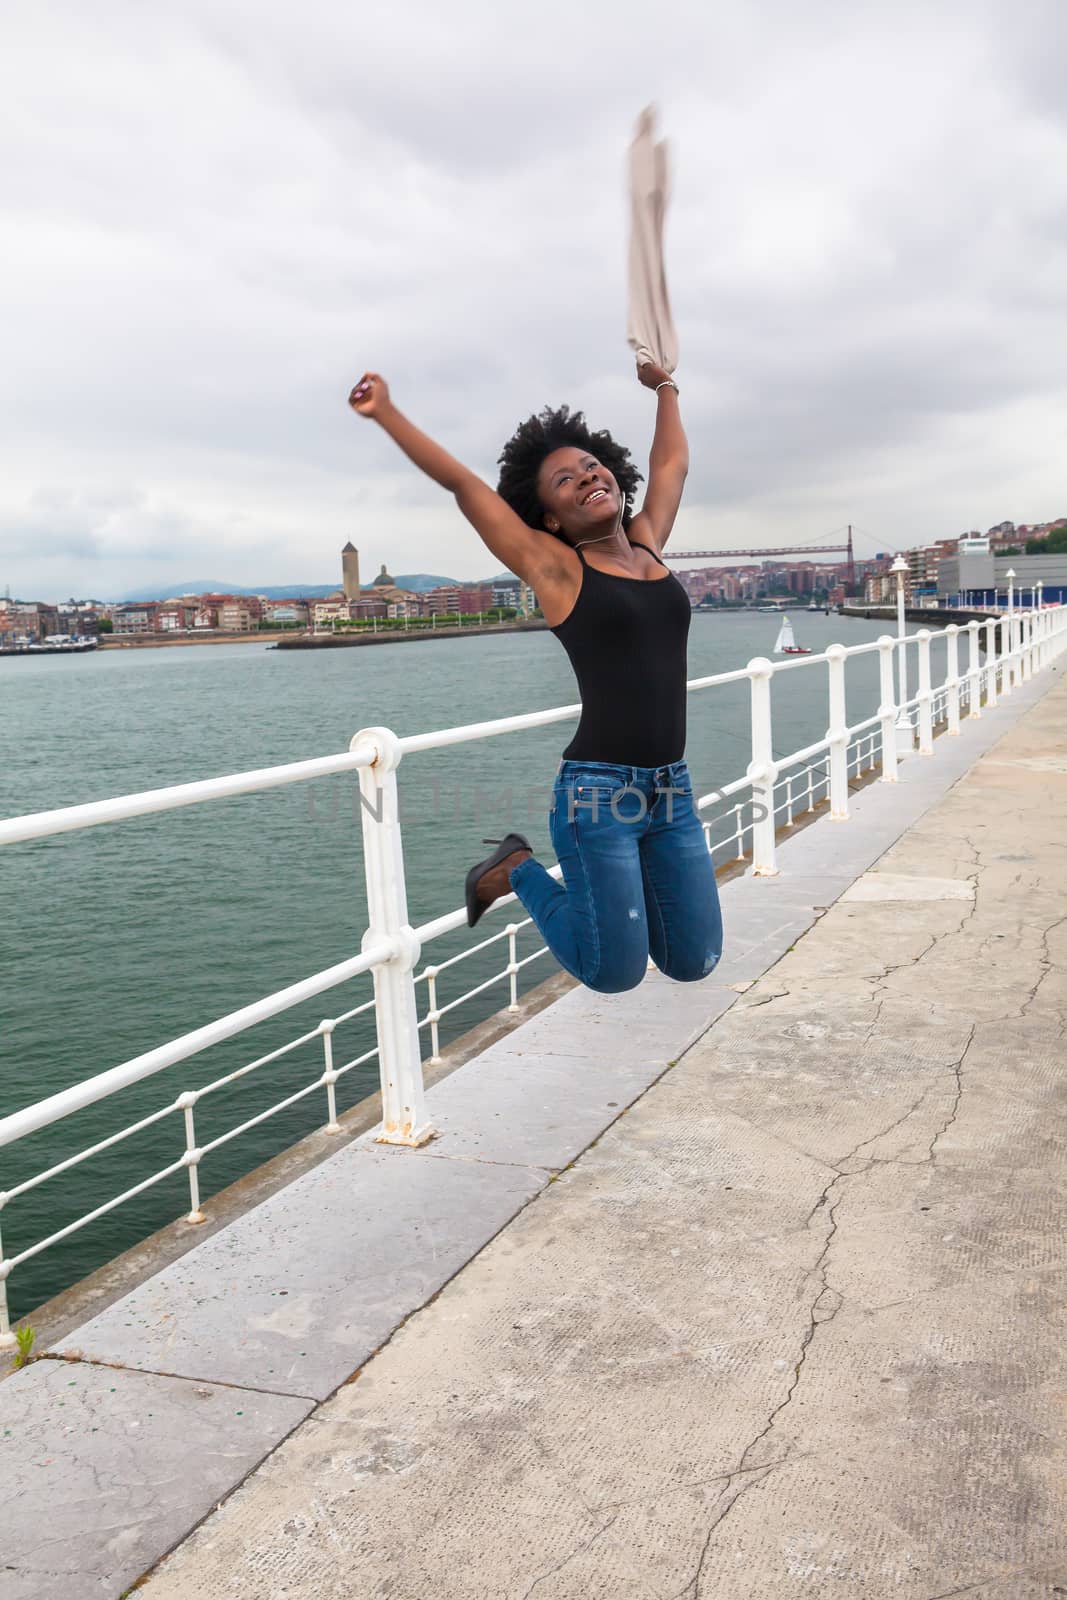 Beautiful African woman jumping near a boardwalk in a coastal city in a cloudy day